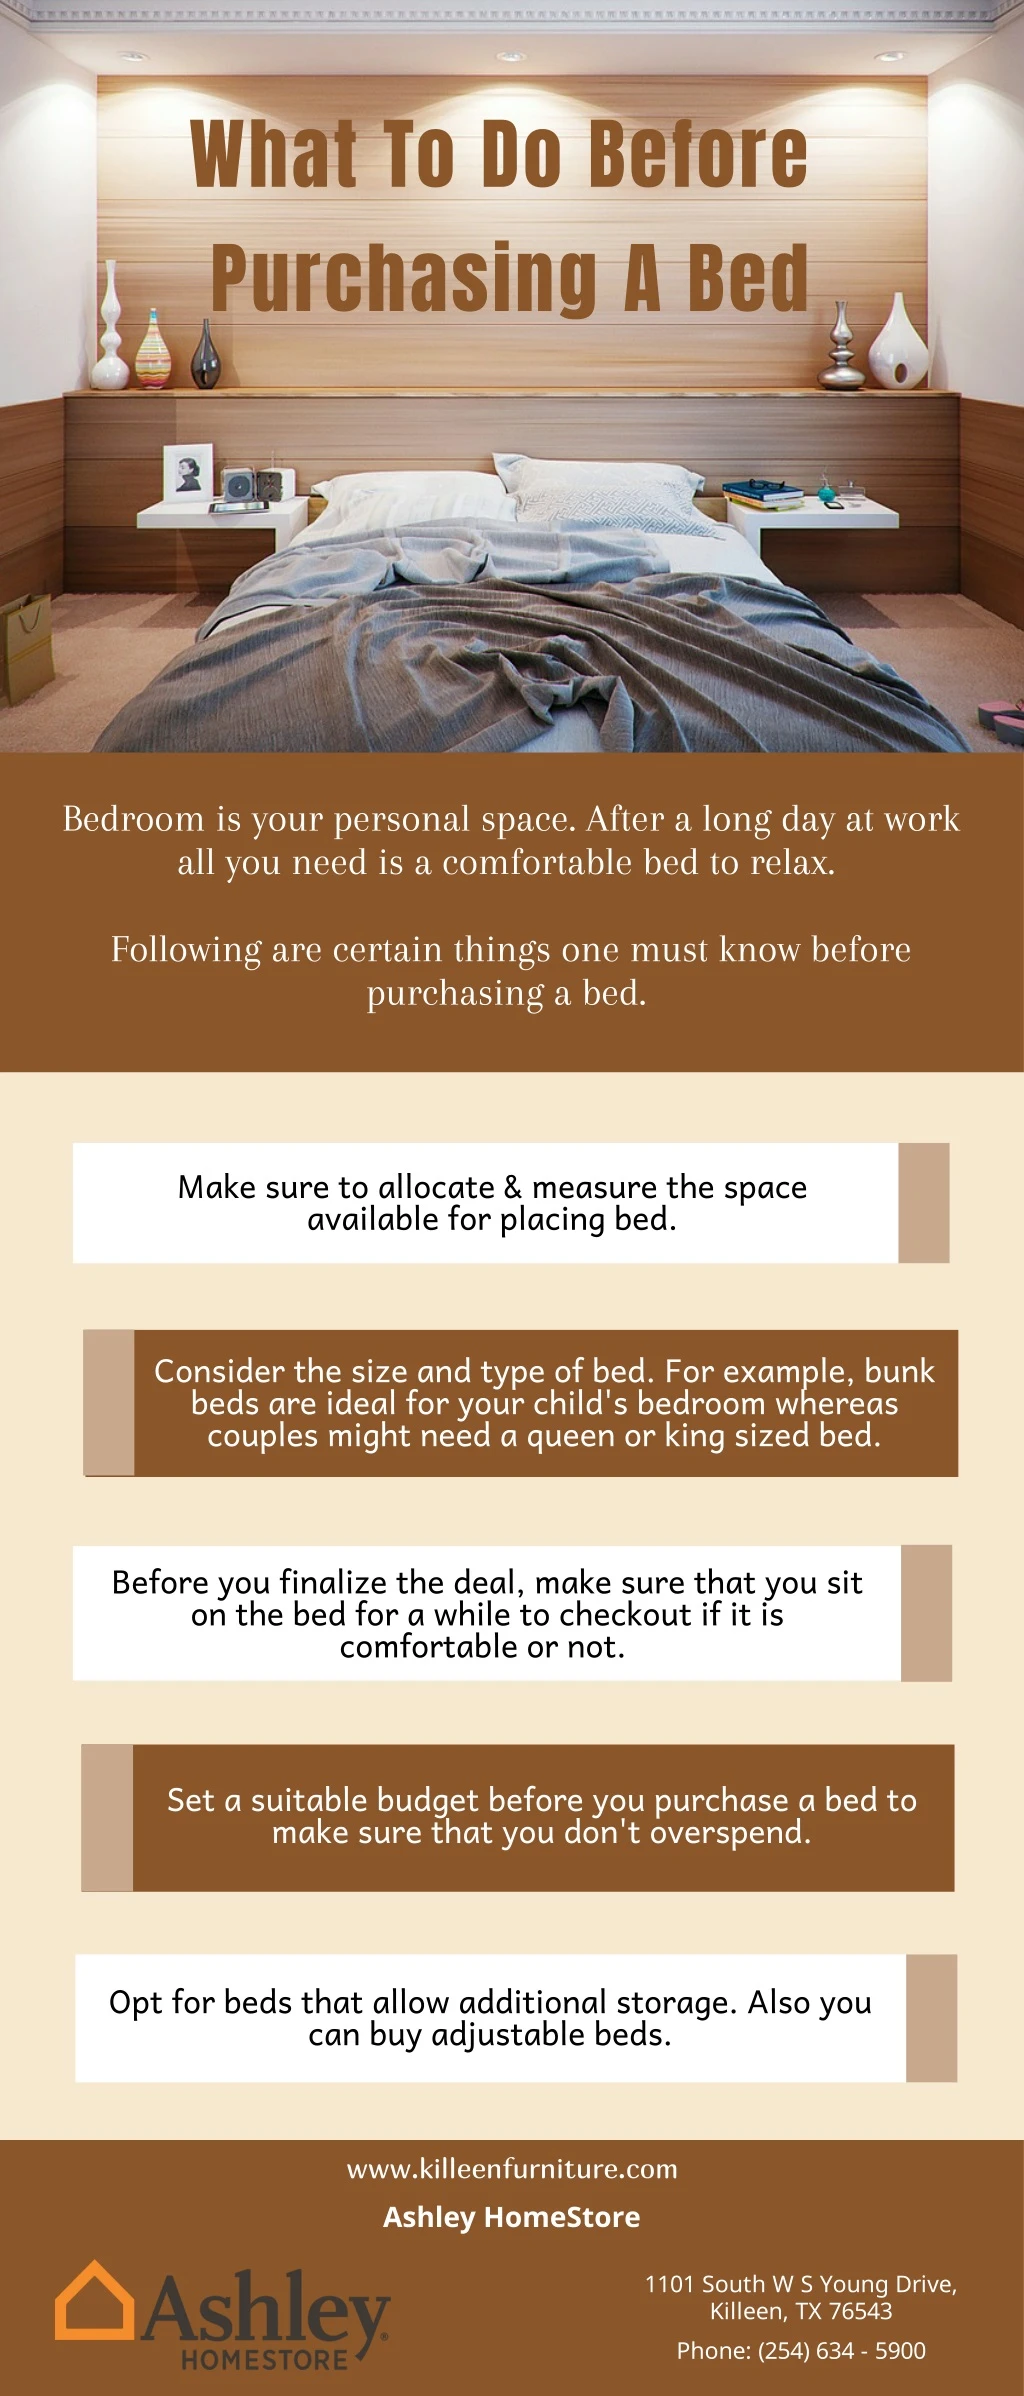 what to do before purchasing a bed